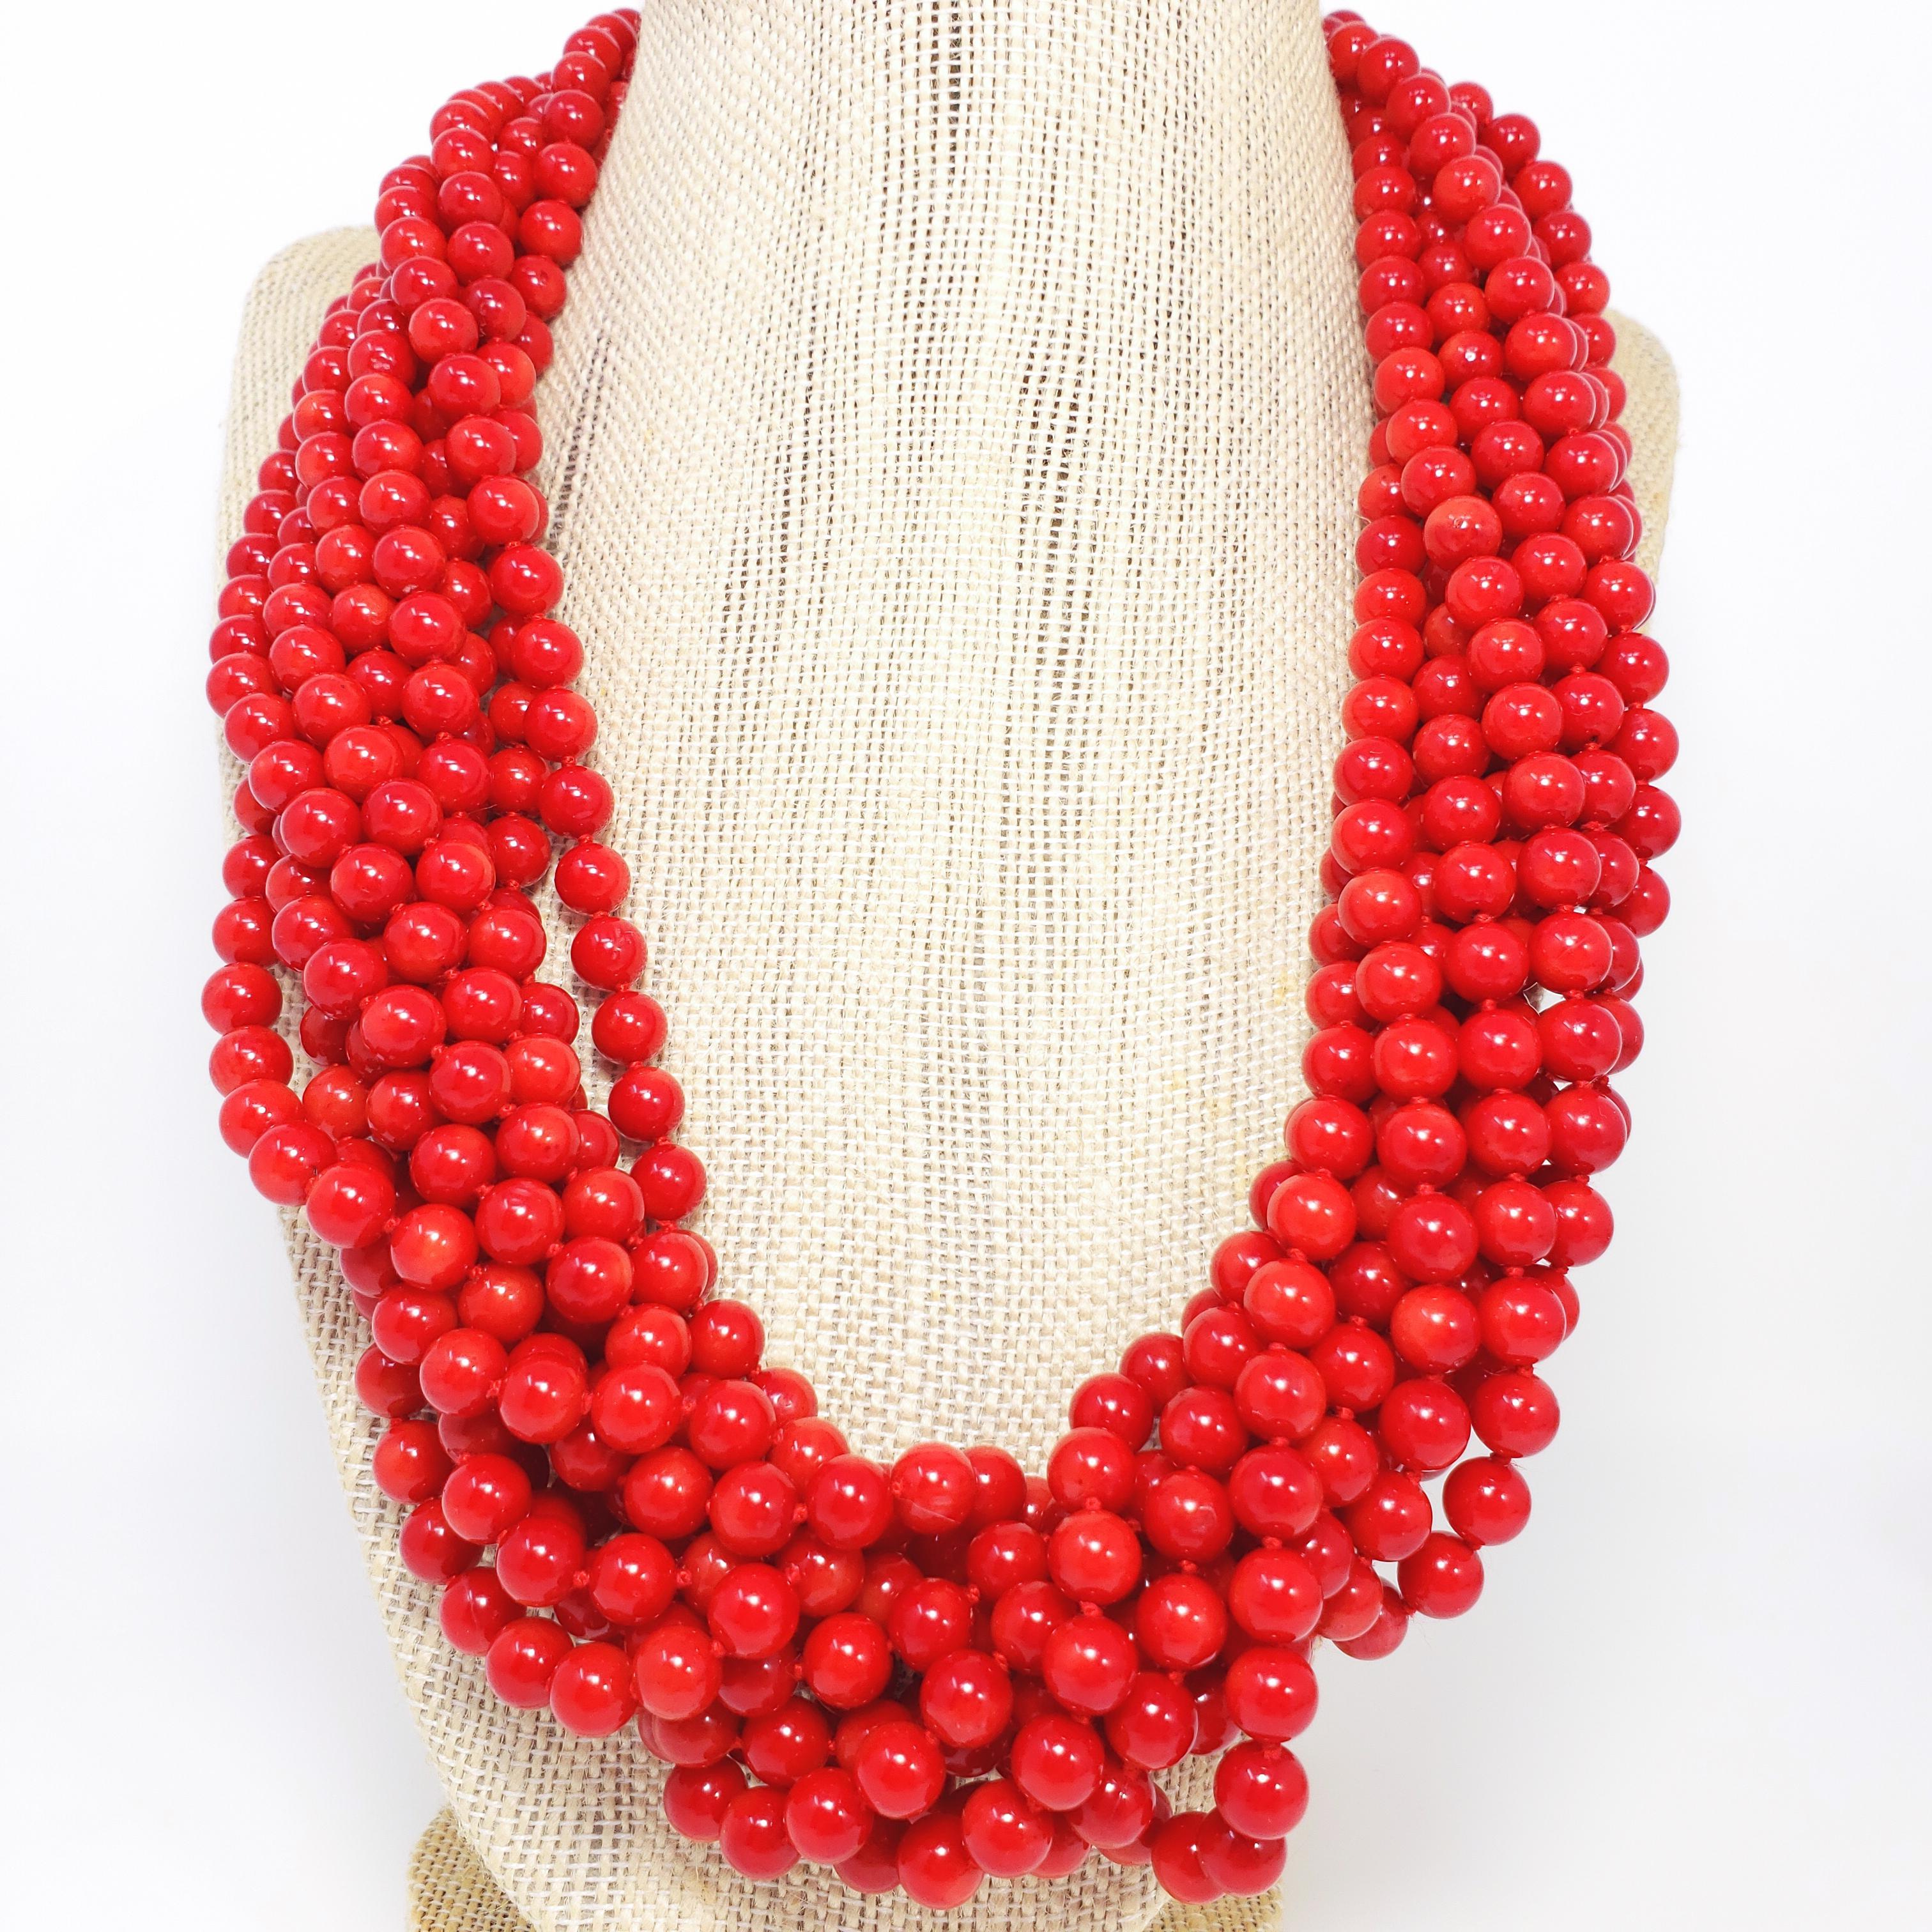 An exquisite necklace featuring 10 strands of 7mm genuine red, sea coral beads on an accented sterling silver sliding clasp. Vibrant, natural, rich red color, in mesmerizing style. Fit for a queen!

Excellent quality.

Dimensions: 57 cm in length.